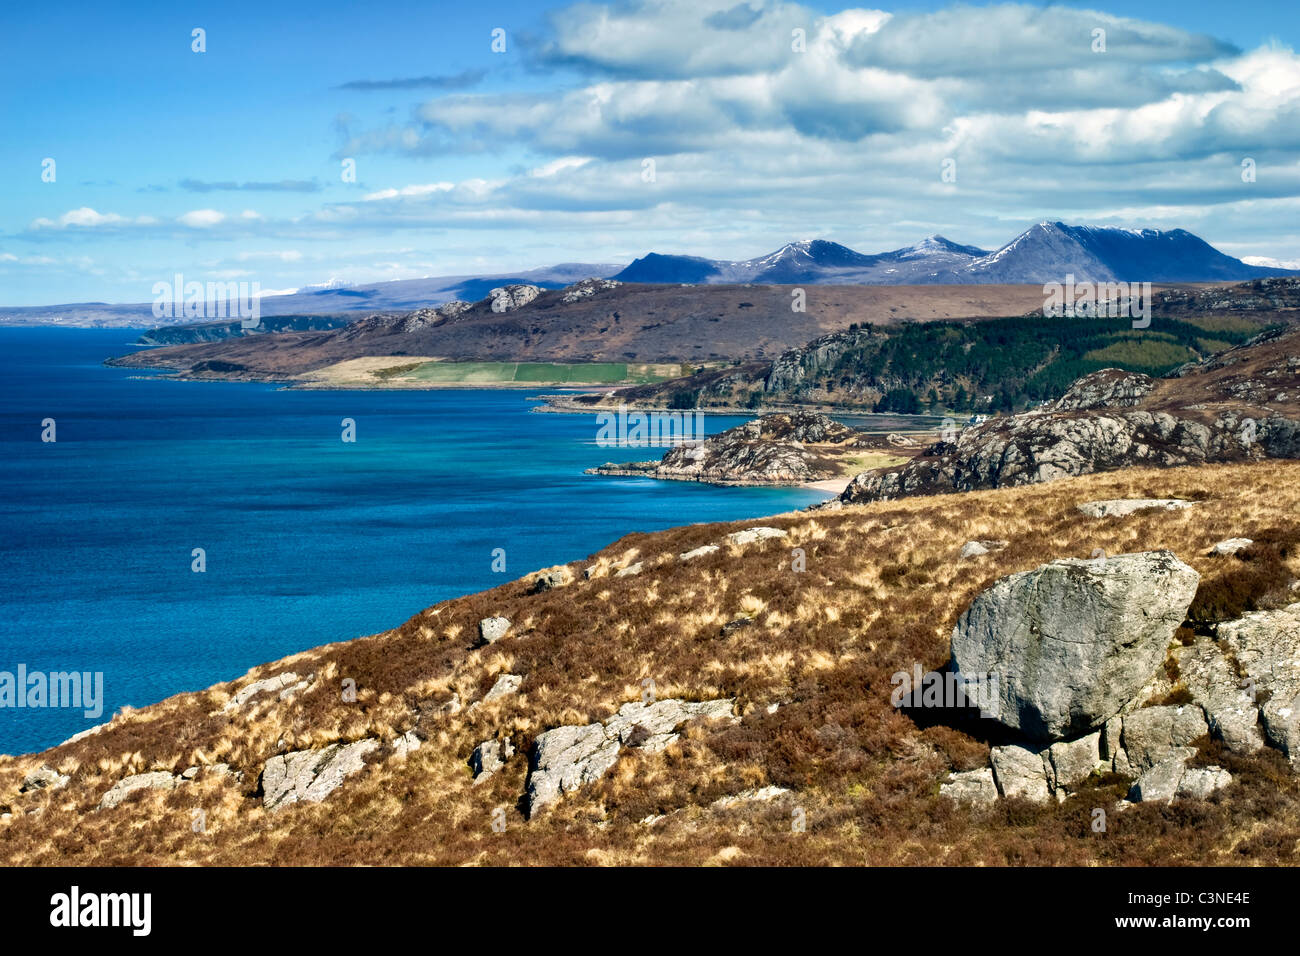 North West coast of Scotland taken at Gruinard bay from viewpoint along the A832 road in Wester Ross, Scotland Stock Photo